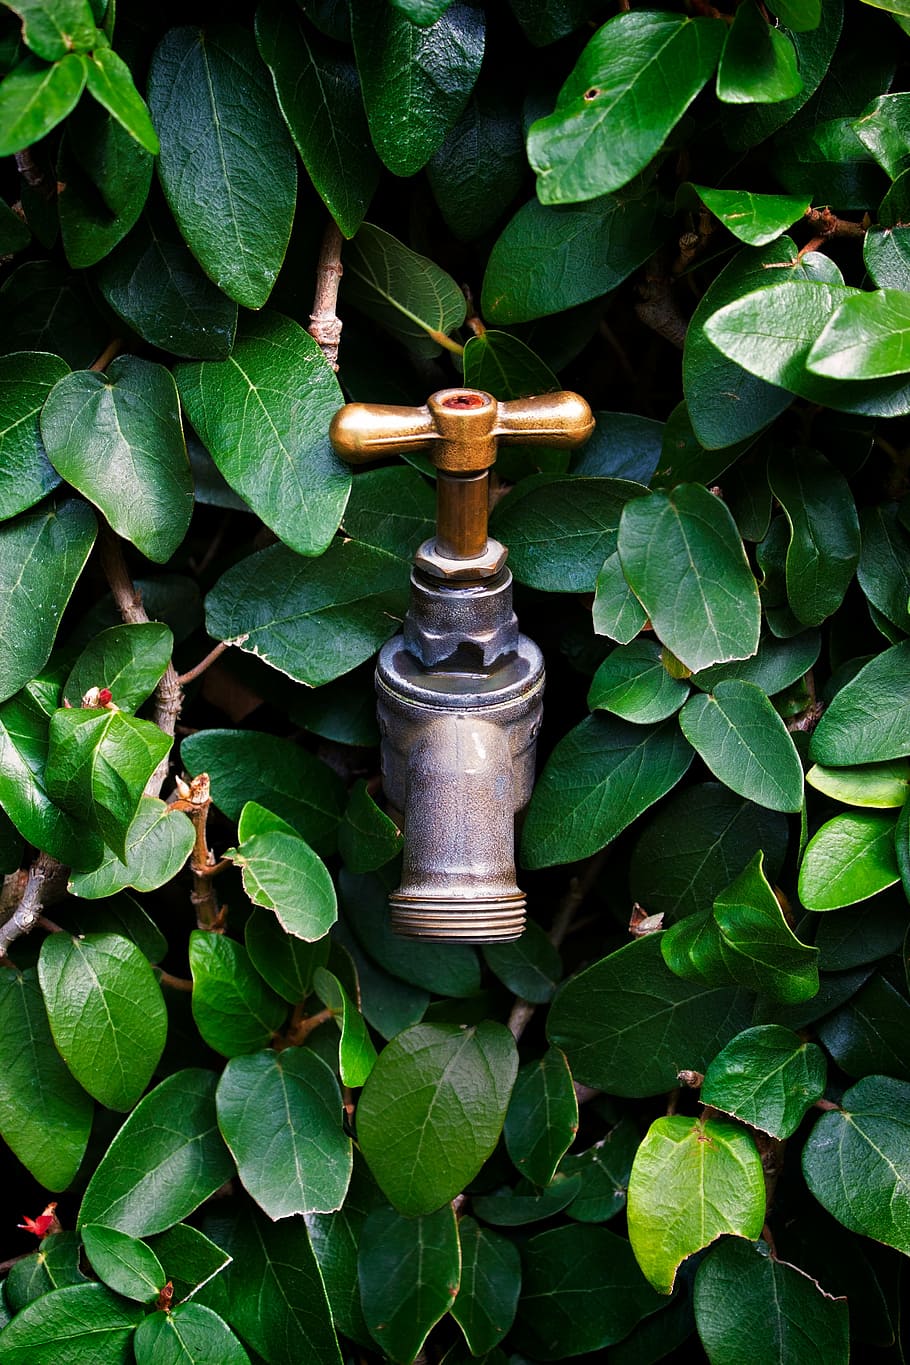 tap, faucet, leaves, water, plumbing, drink, liquid, pipe, silver, environment